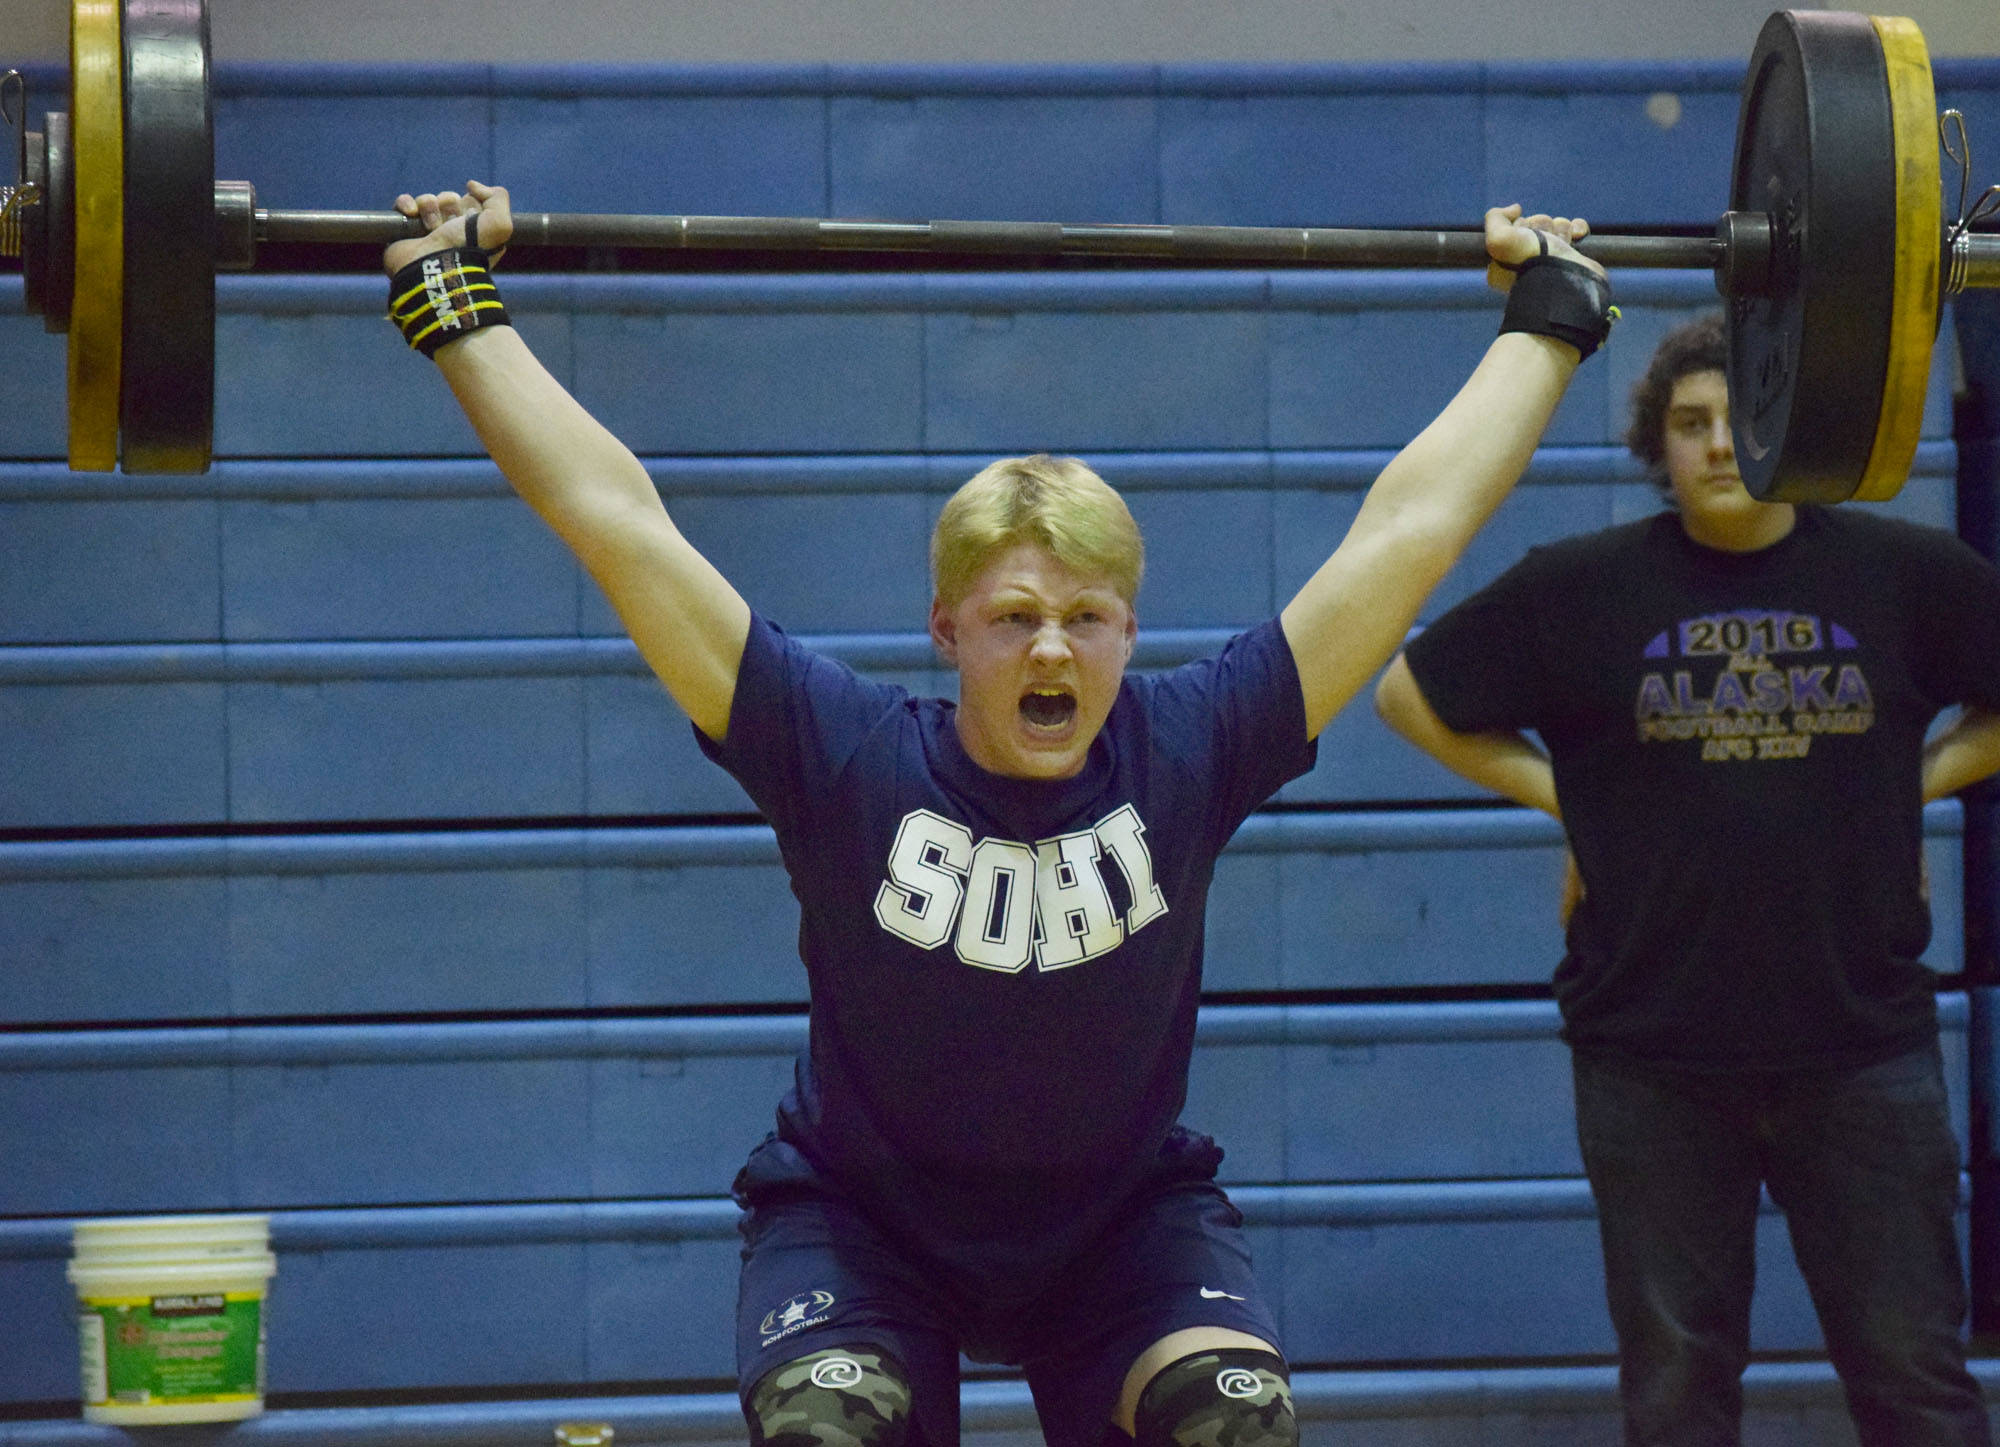 Soldotna freshman Galen Brantley III cleans and jerks Wednesday evening at the 11th biannual CrossFit Competition at Soldotna High School. (Photo by Joey Klecka/Peninsula Clarion)